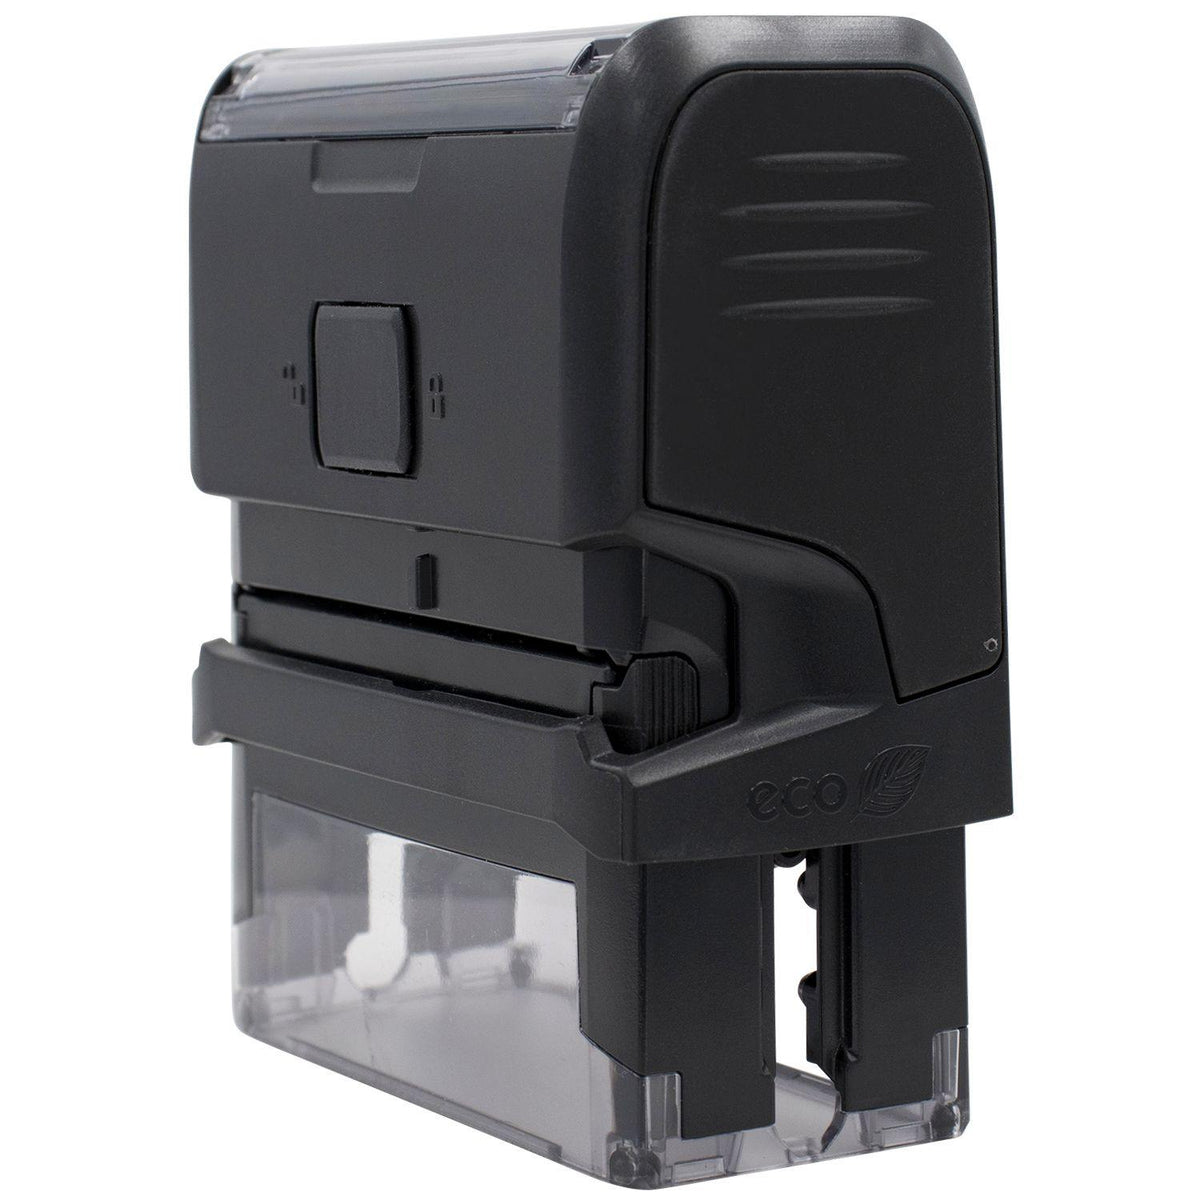 Self-Inking Bold Priority Stamp - Engineer Seal Stamps - Brand_Trodat, Impression Size_Small, Stamp Type_Self-Inking Stamp, Type of Use_Legal, Type of Use_Office, Type of Use_Postal &amp; Mailing